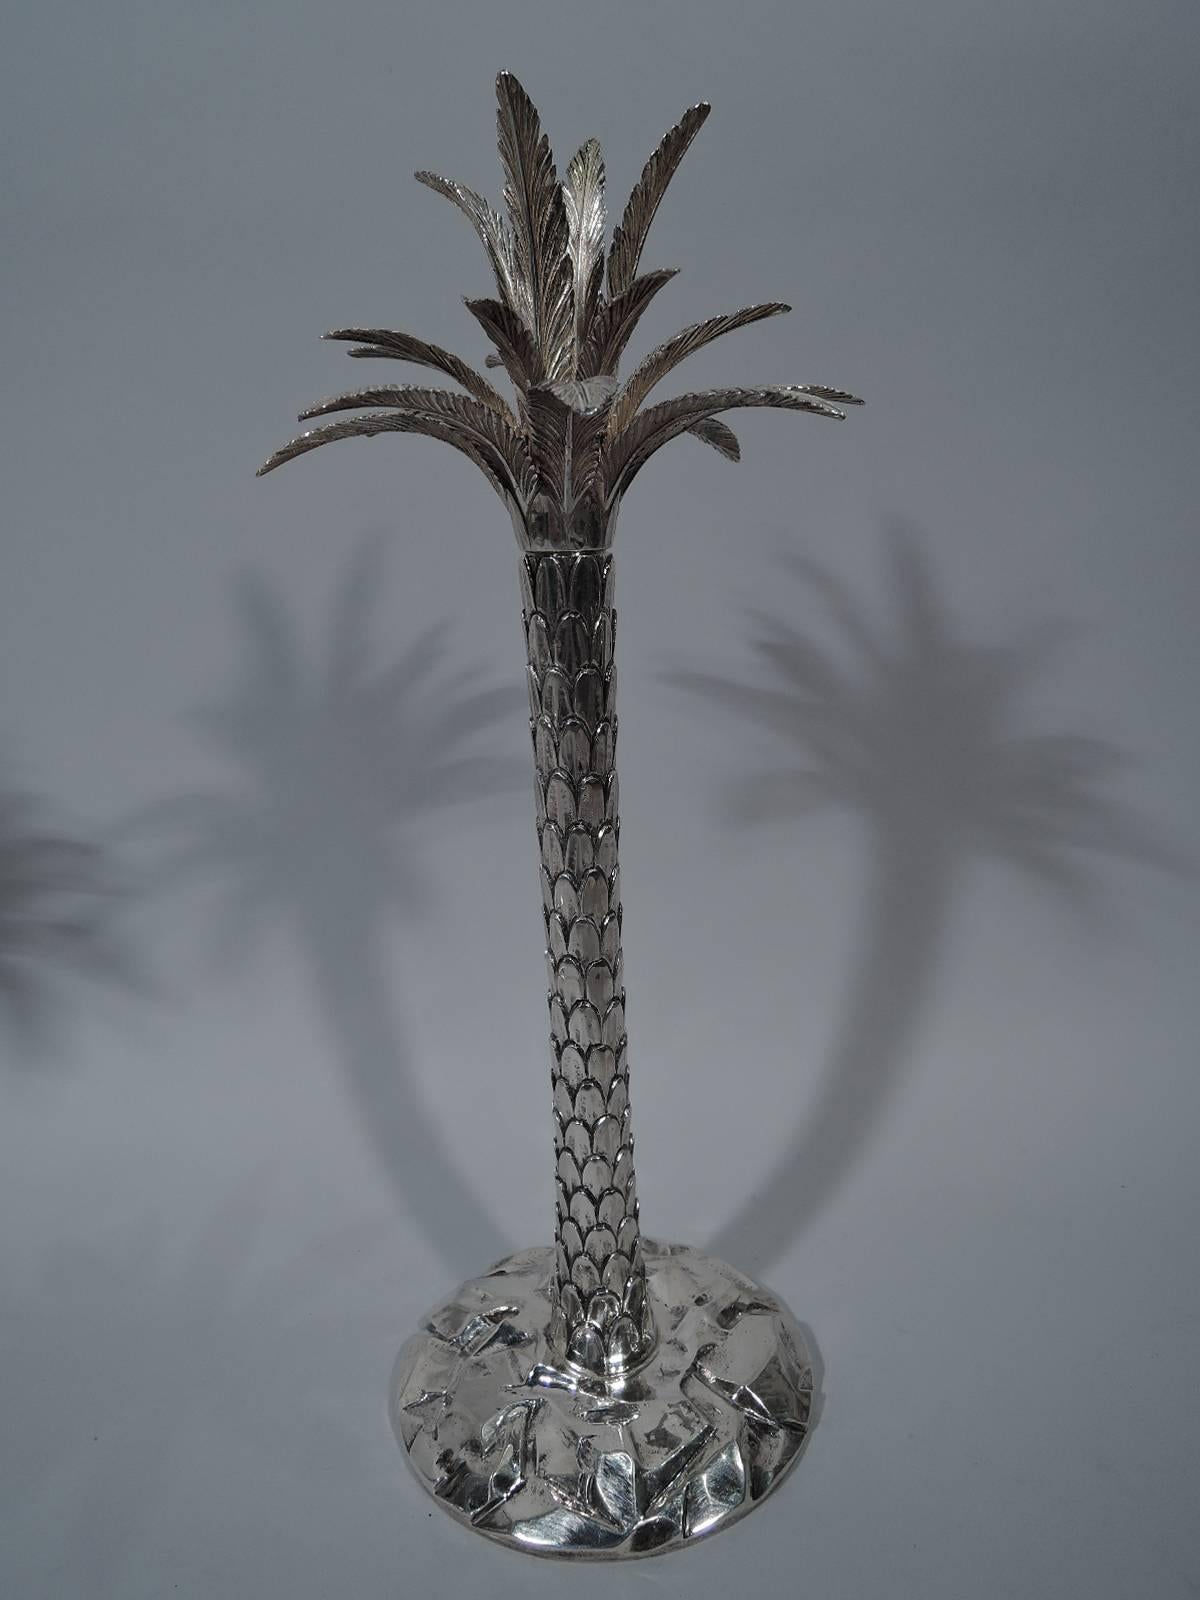 Pair of fabulous sterling silver palm tree candlesticks. Retailed by Tiffany in New York. Each: Columnar trunk with imbricated bark rooted to uneven terrain (that is, a round base). Socket concealed amidst dense fronds. A 1960s tiki-era motif that